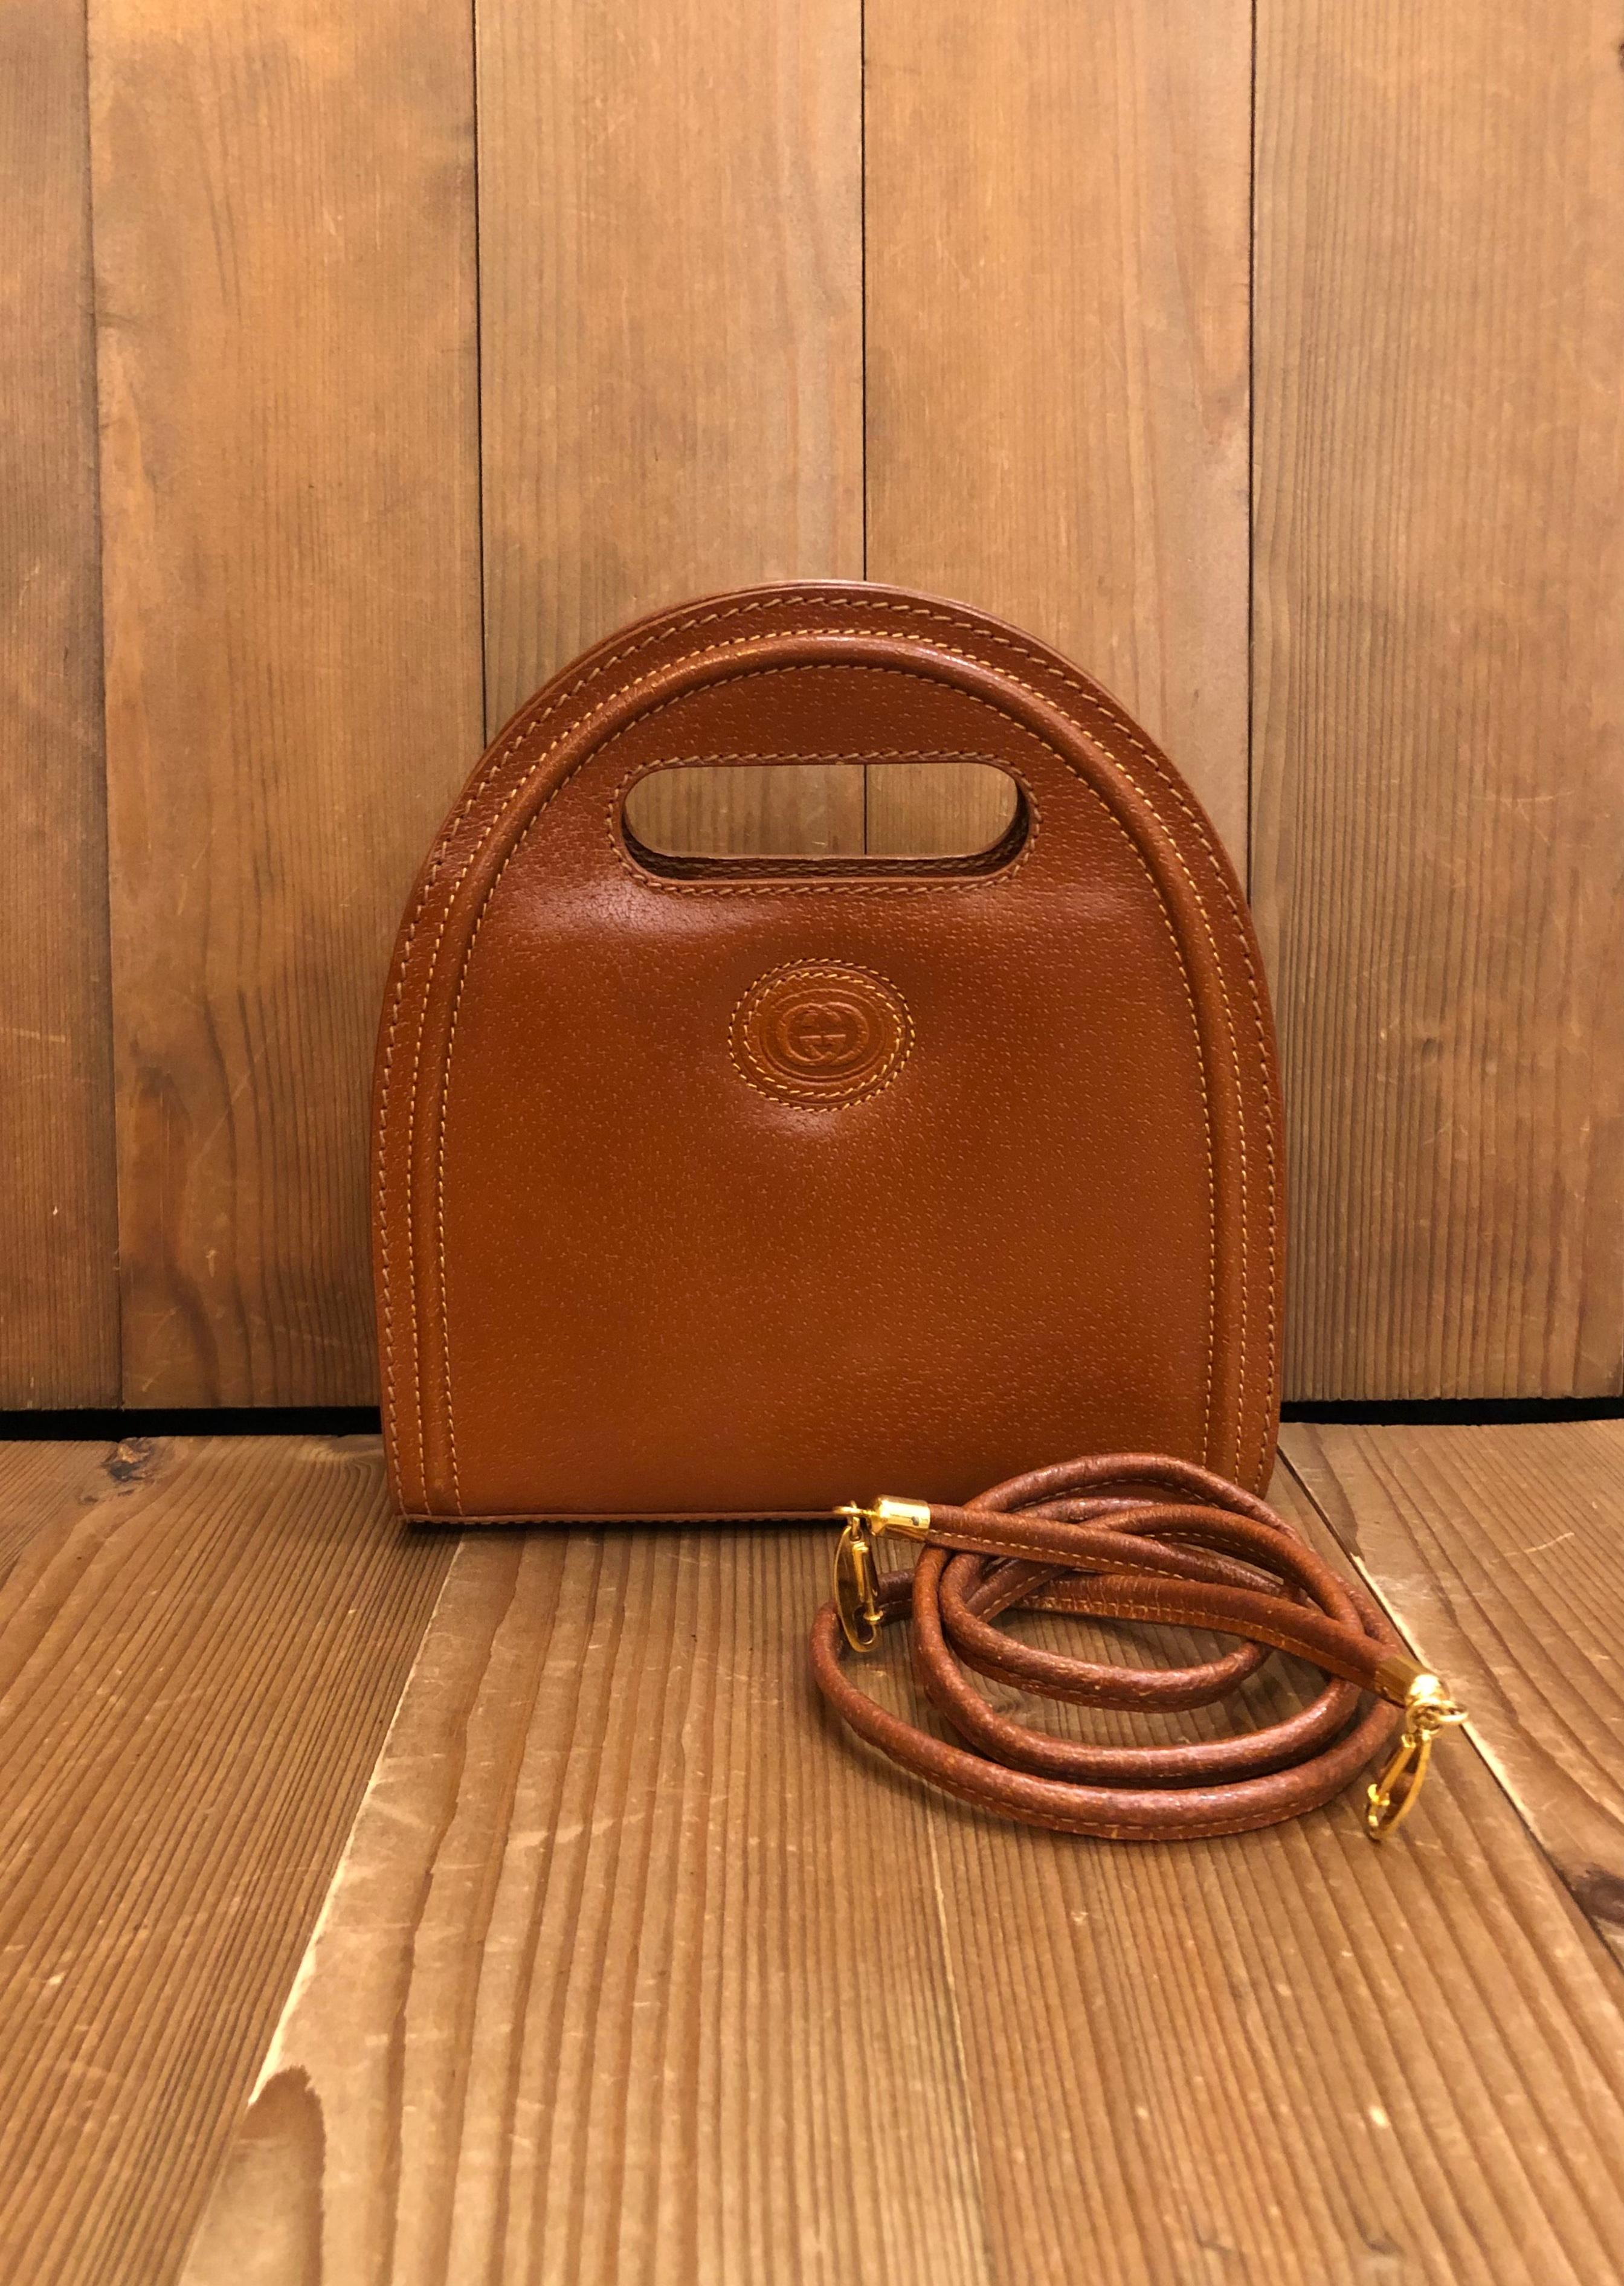 This vintage GUCCI mini book tote is crafted of pigskin leather in caramel color featuring a detachable crossbody strap of the same leather. Magnetic snap closure opens to an all suede interior with one zippered pocket. Made in Italy. Measures